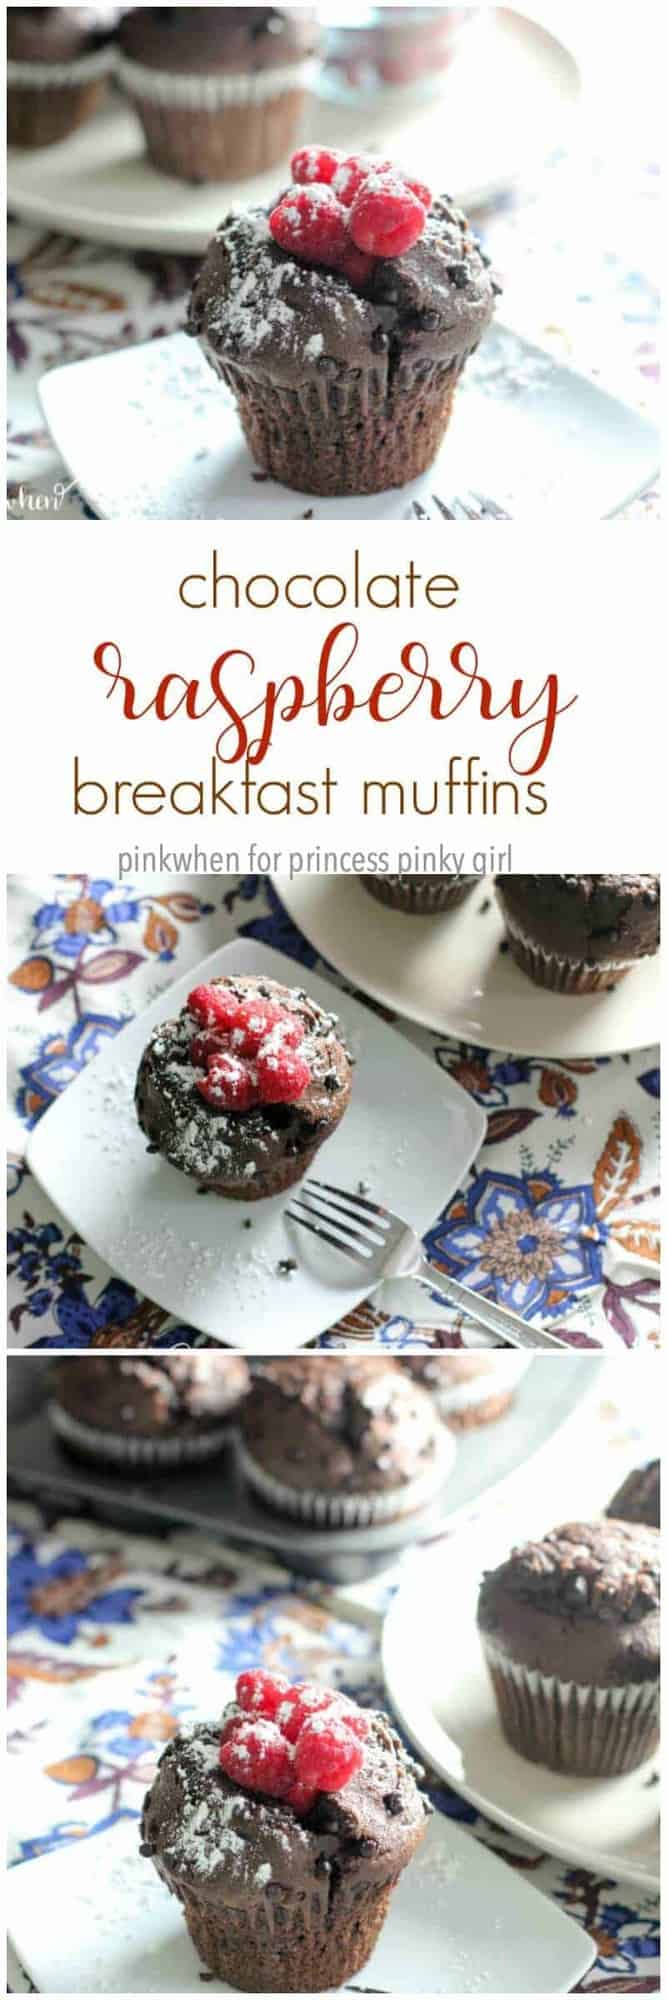 What's not to love about a chocolate muffin for breakfast?  These chocolate raspberry breakfast muffins are one of my favorite weekend cheats.  They are super moist, loaded with chocolate chips, and topped with raspberries and a sprinkle or two of powdered sugar.